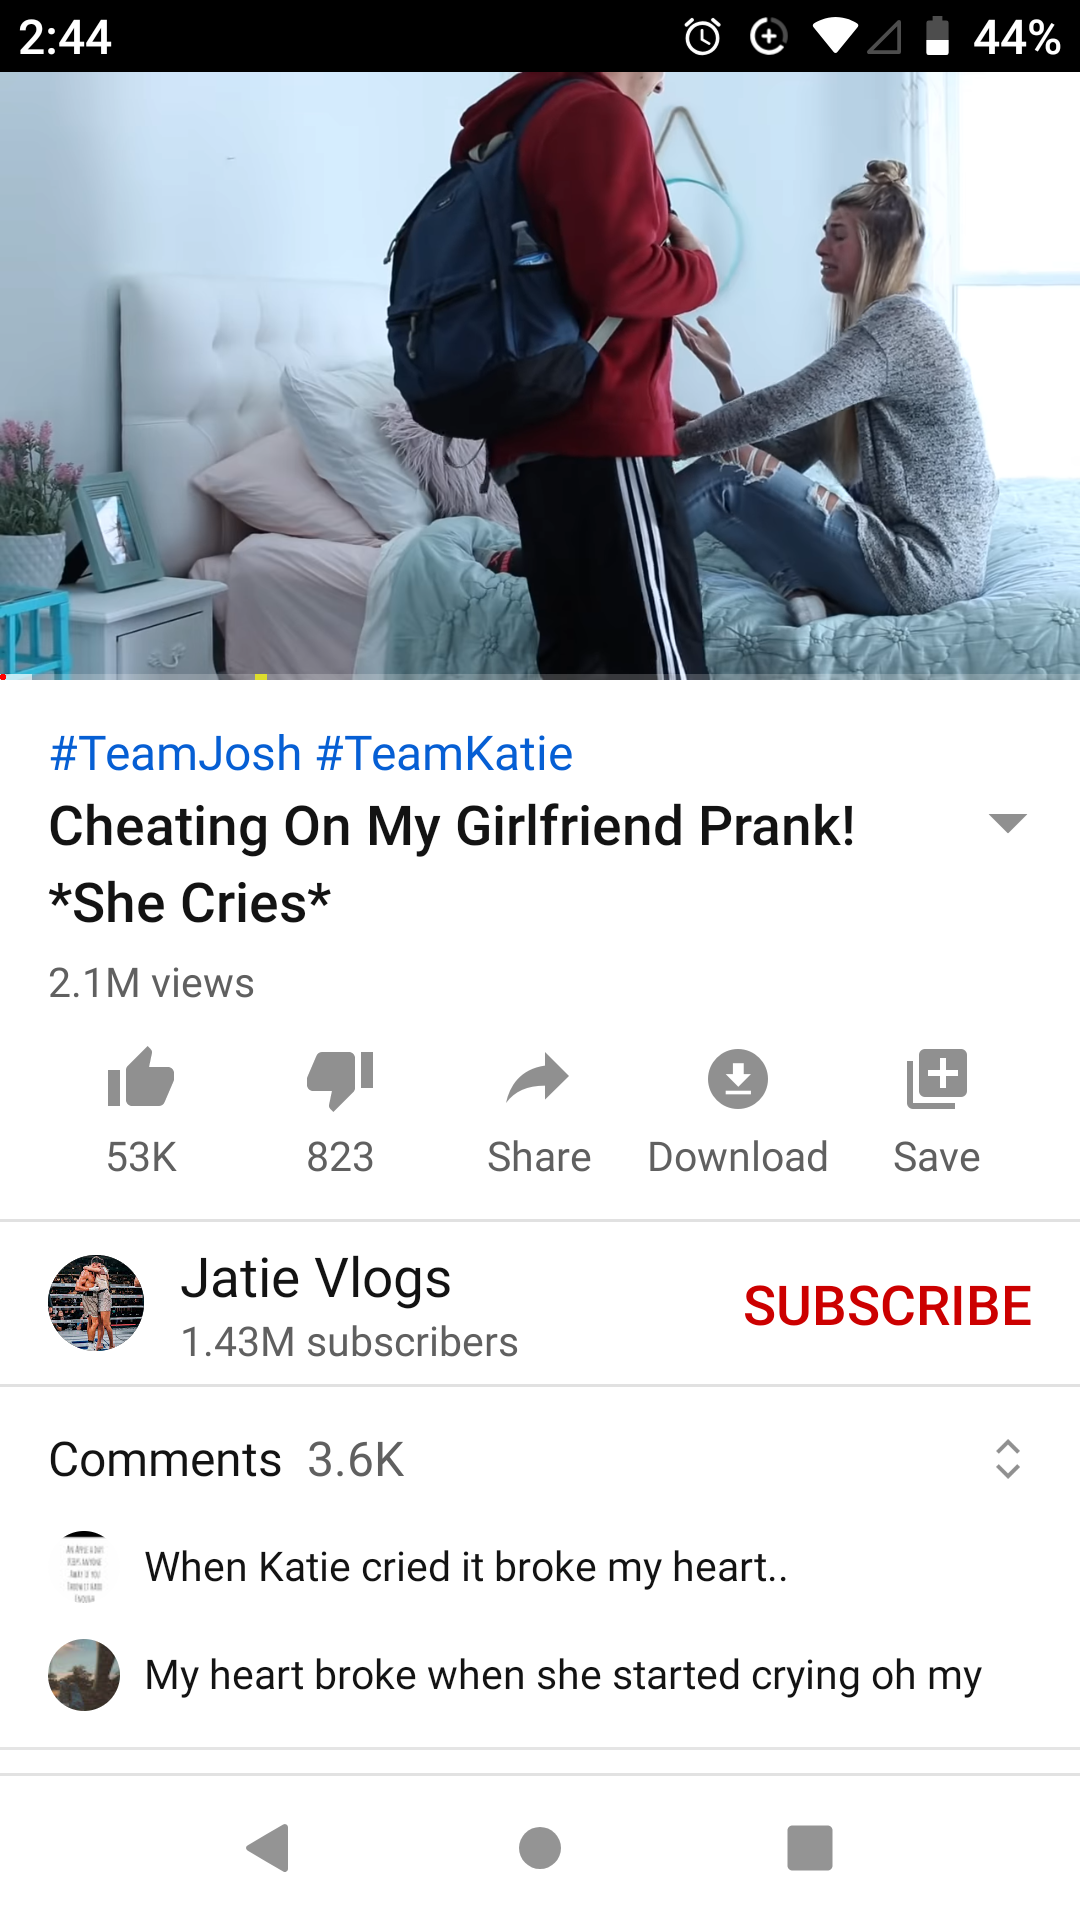 media - 0 4 .44% Cheating On My Girlfriend Prank! She Cries 2.1 M views 53K 823 S hare Download Save A Jatie Vlogs 1.43M subscribers Subscribe When Katie cried it broke my heart.. My heart broke when she started crying oh my